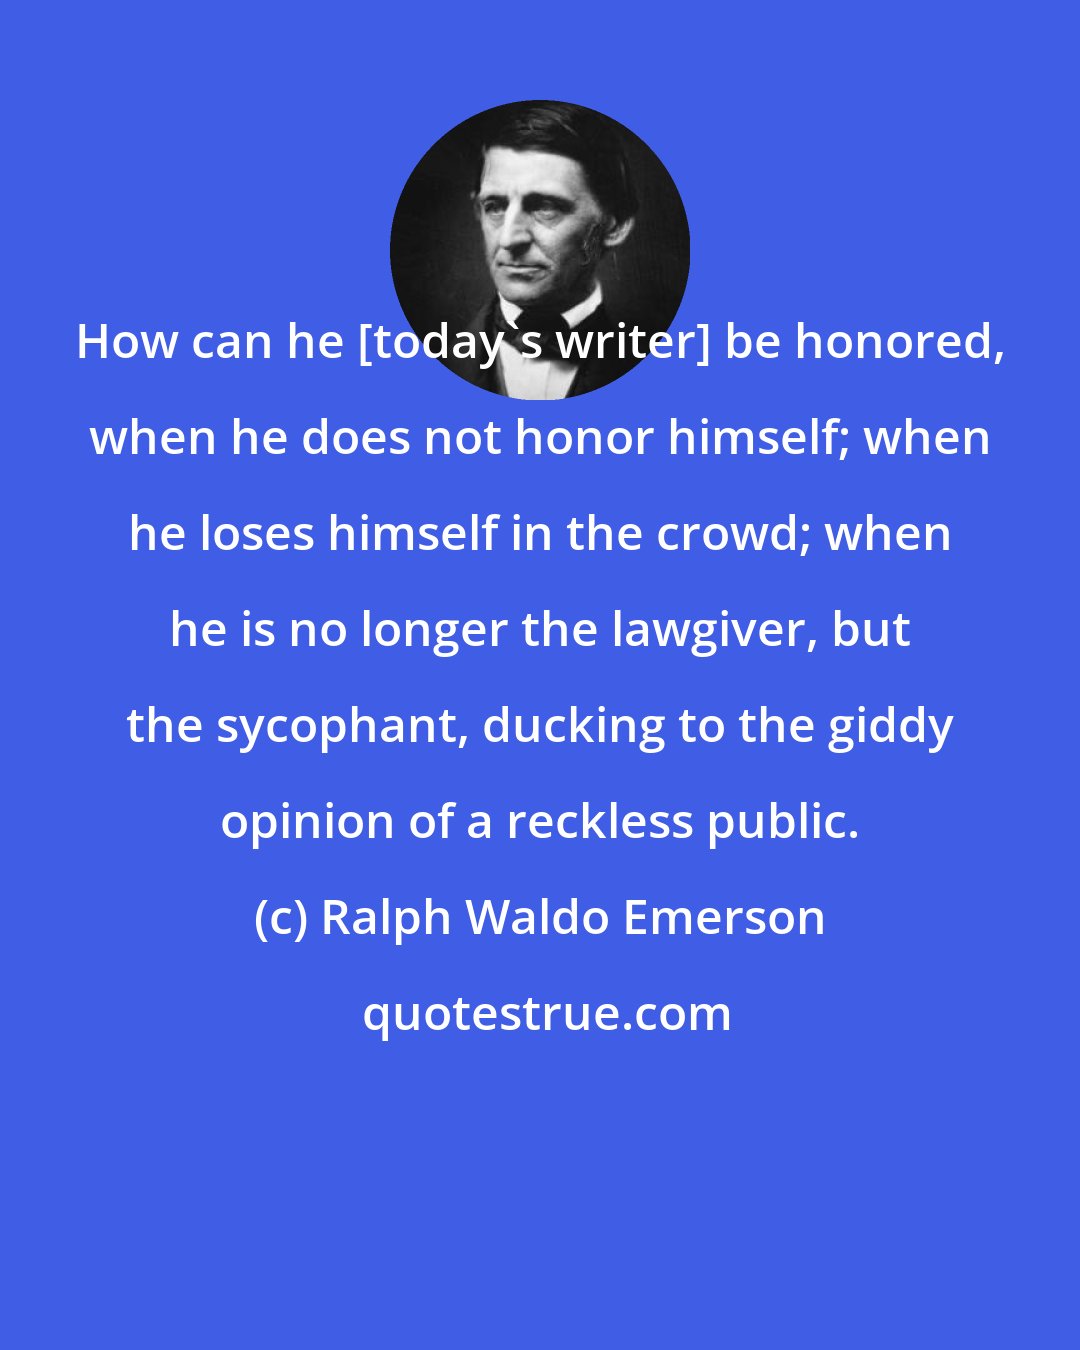 Ralph Waldo Emerson: How can he [today's writer] be honored, when he does not honor himself; when he loses himself in the crowd; when he is no longer the lawgiver, but the sycophant, ducking to the giddy opinion of a reckless public.